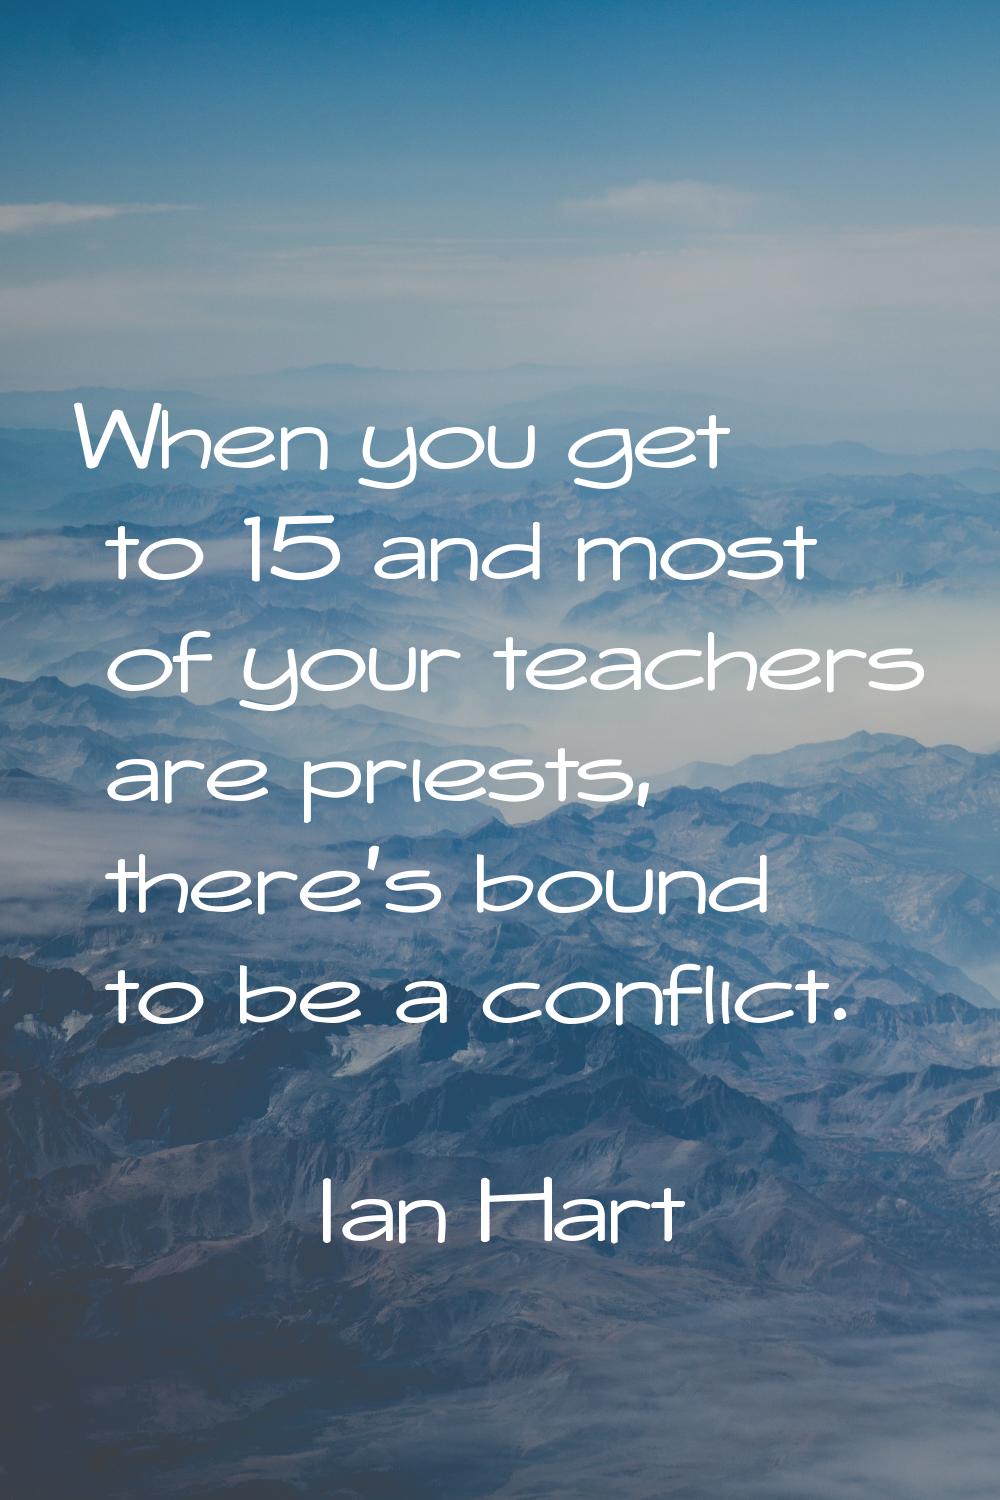 When you get to 15 and most of your teachers are priests, there's bound to be a conflict.